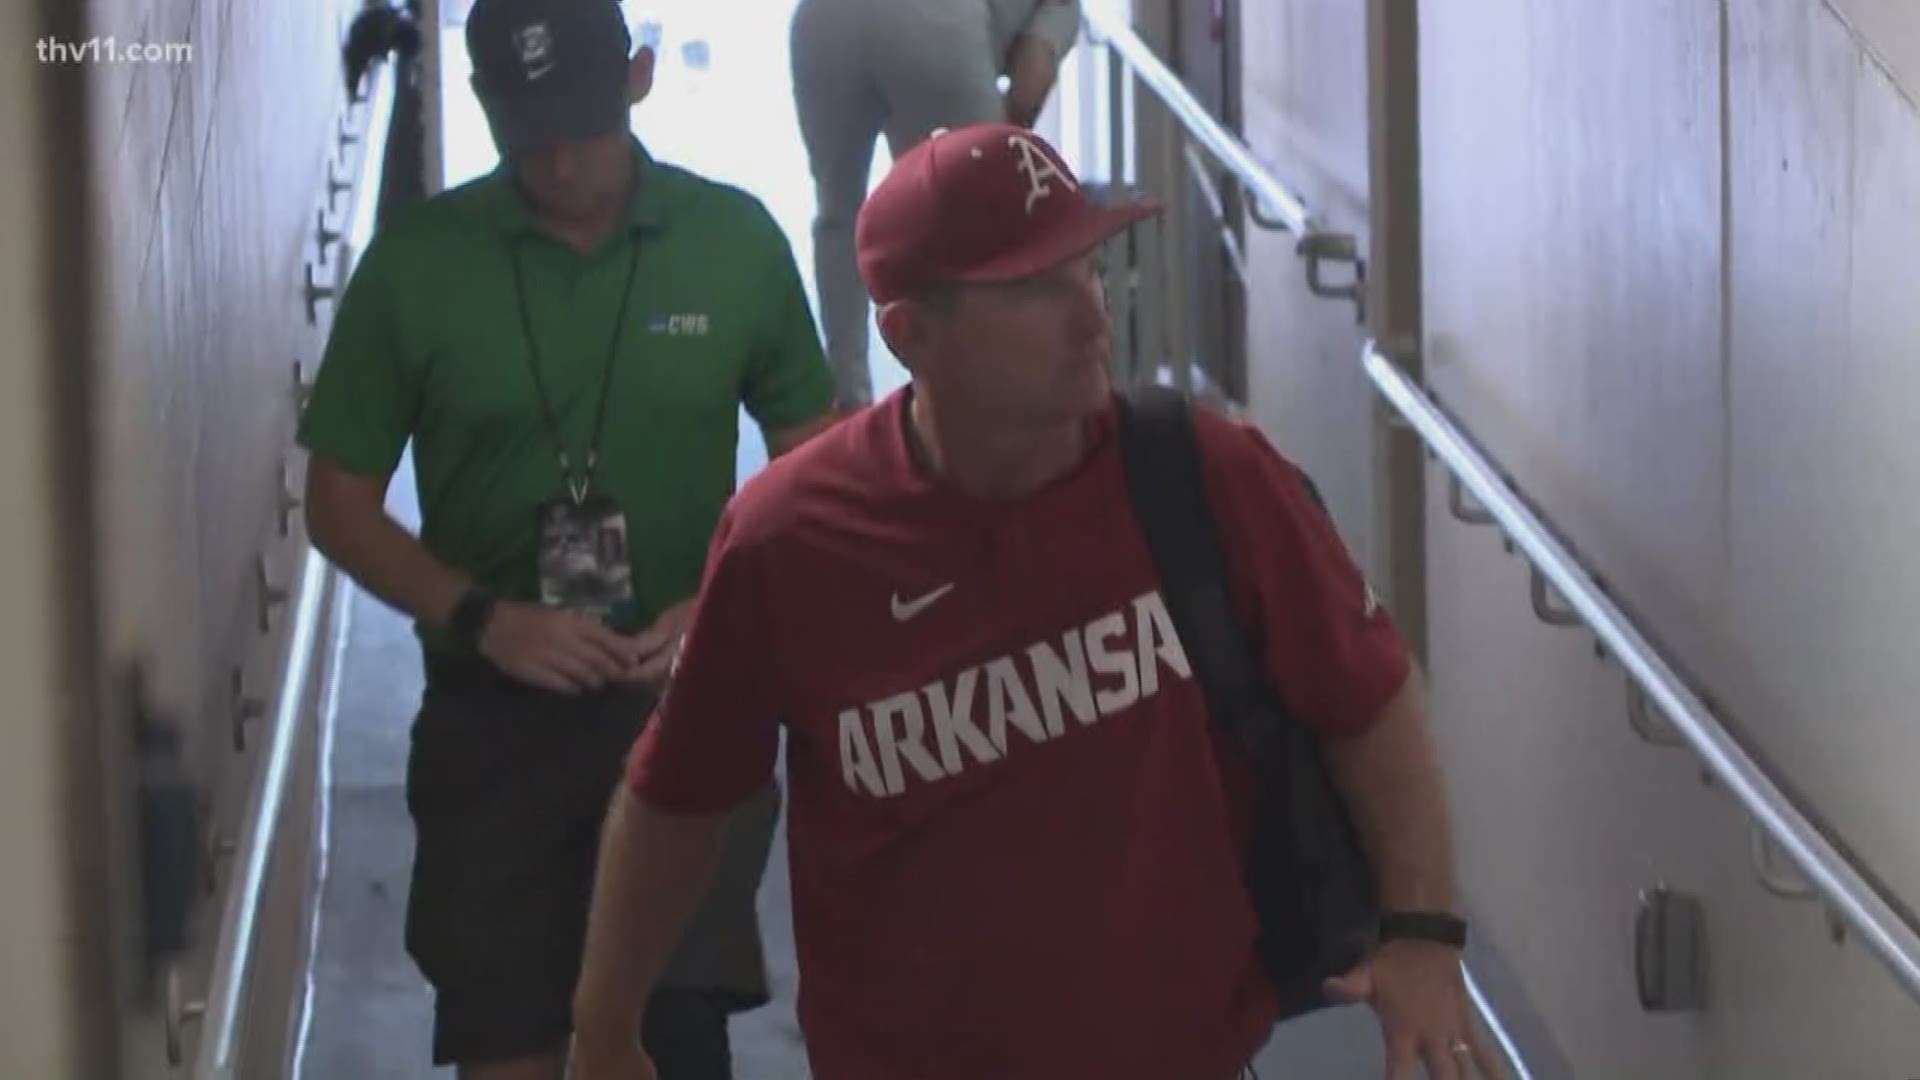 The Razorbacks’ appearance in the College World Series caps the program’s 10th trip to Omaha, and its sixth under head coach Dave Van Horn. Arkansas ends the season with a 46-20 record, tying for the second-most wins in a season under Van Horn. THV11's Hayden Balgavy has a post game recap from Omaha.